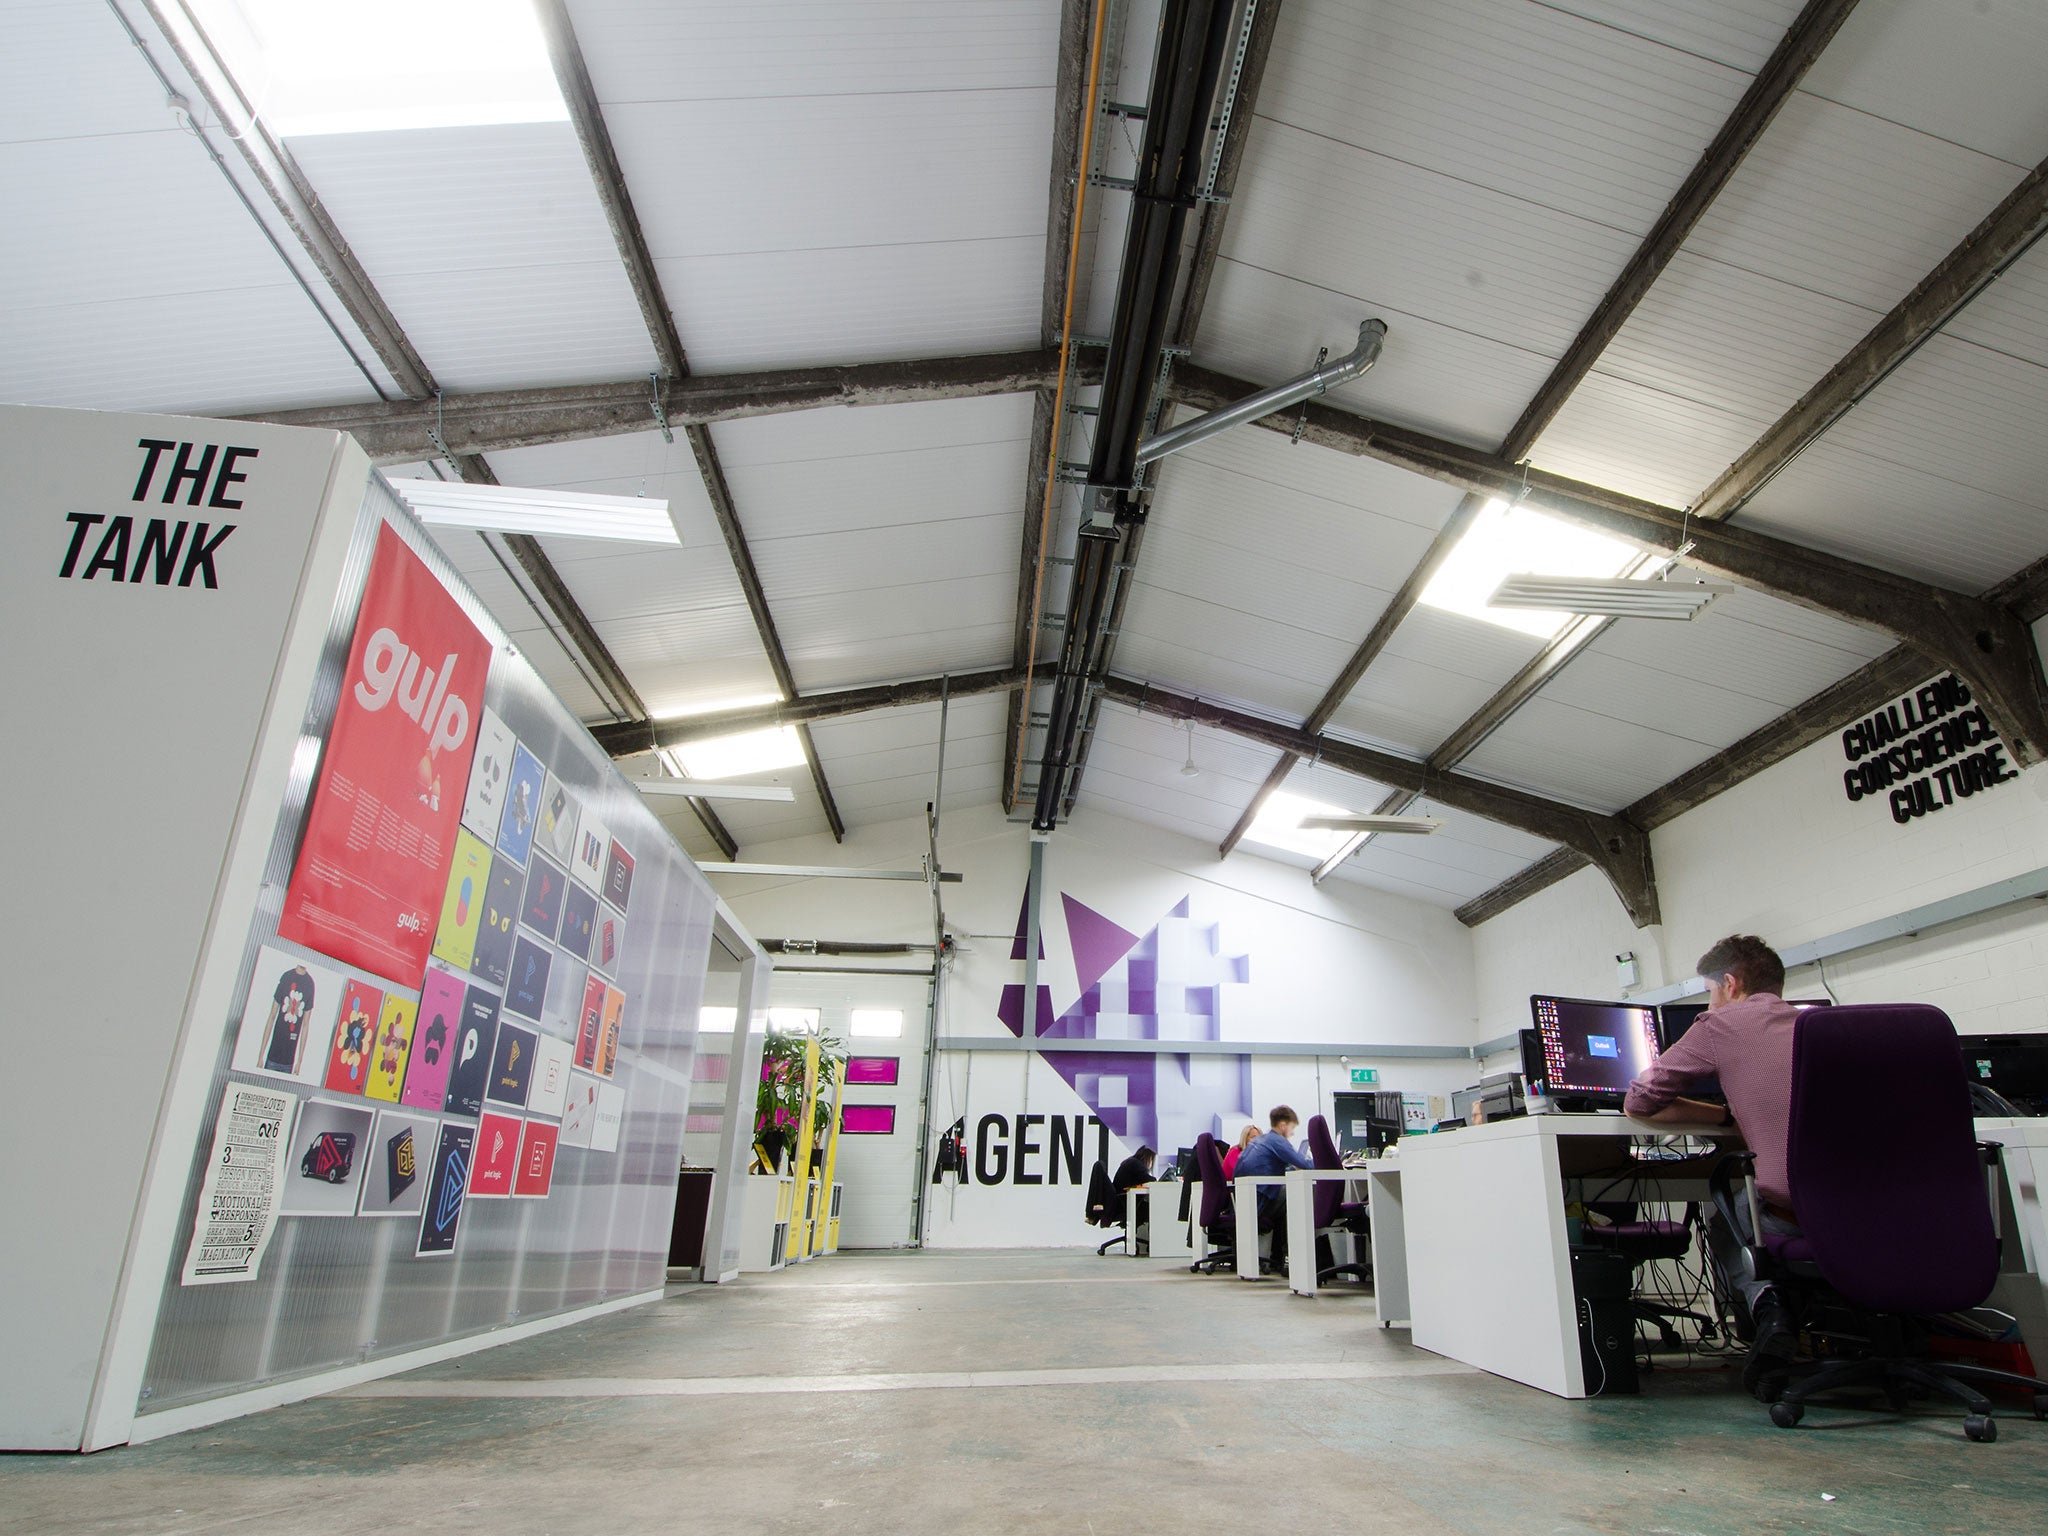 Agent Marketing is a UK marketing agency based in Liverpool